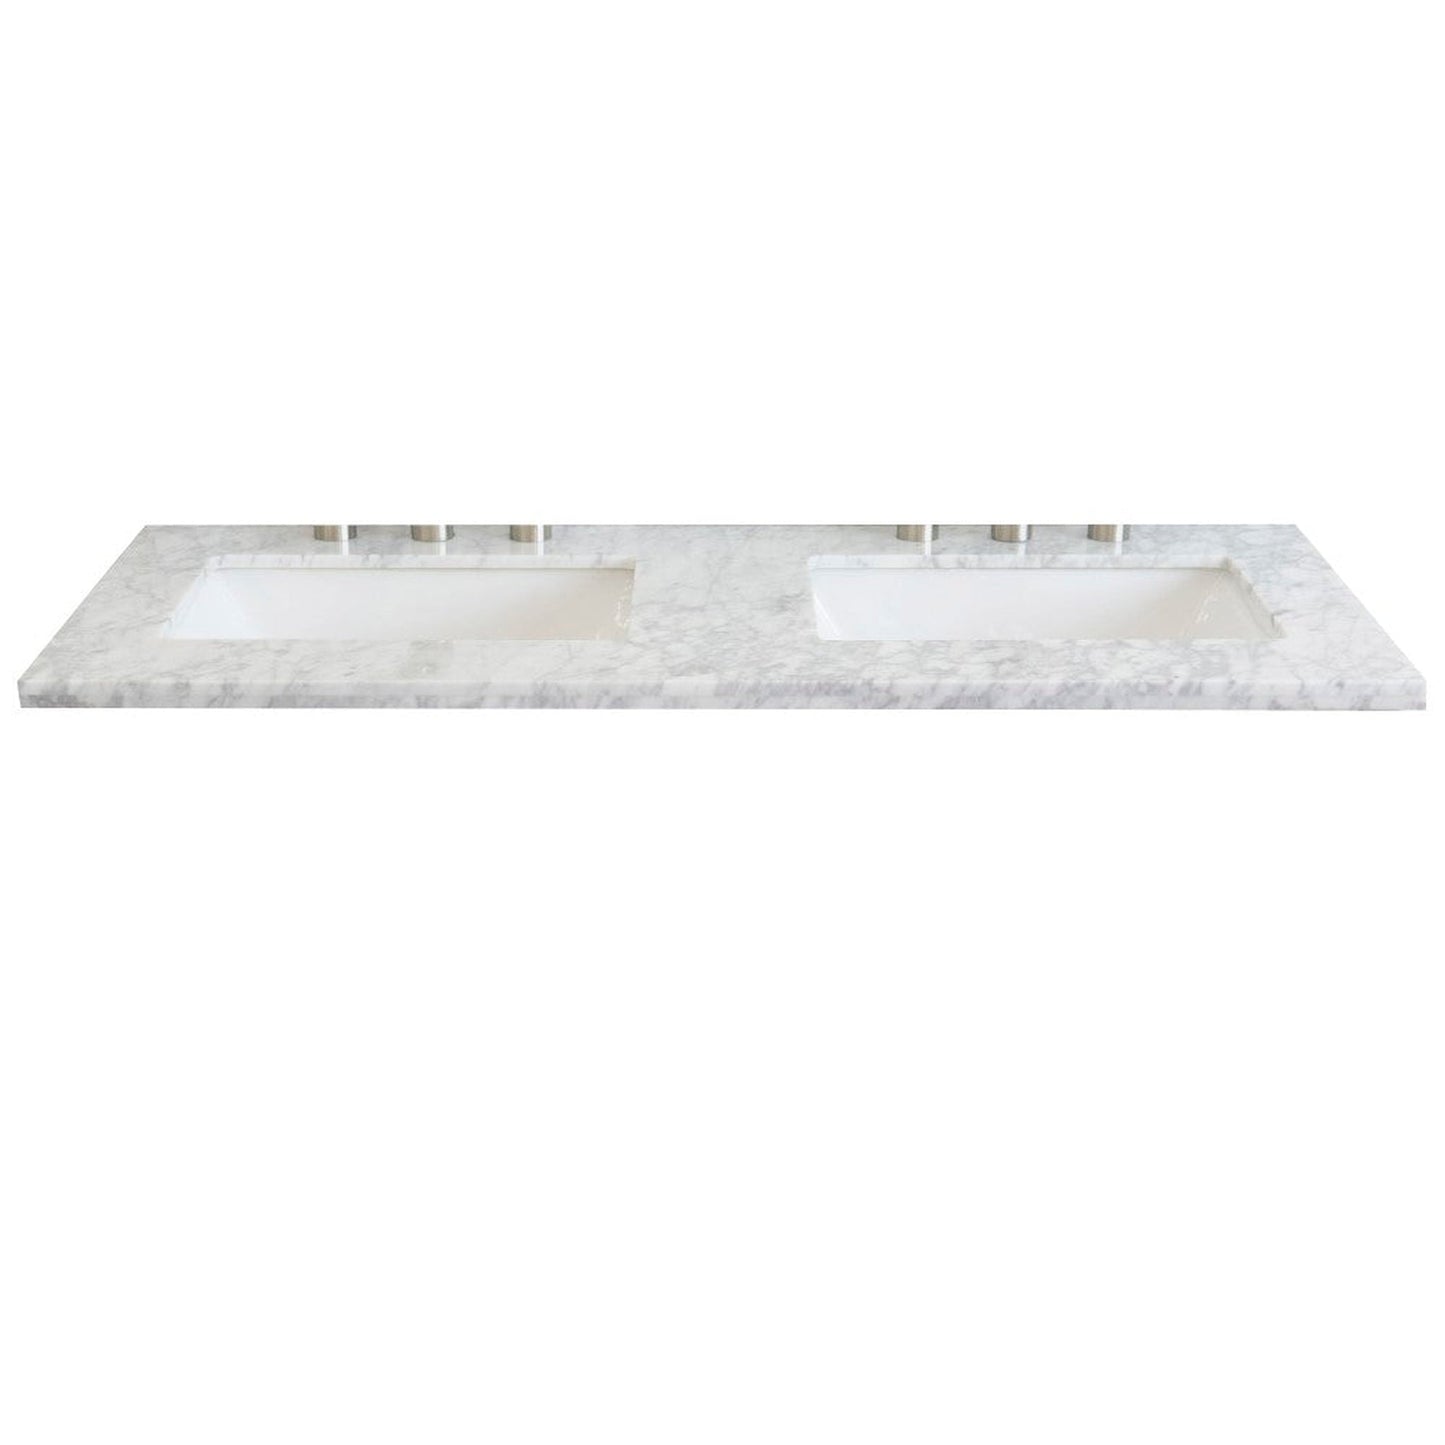 Bellaterra Home 49" x 22" White Carrara Marble Three Hole Vanity Top With Double Undermount Rectangular Sink and Overflow